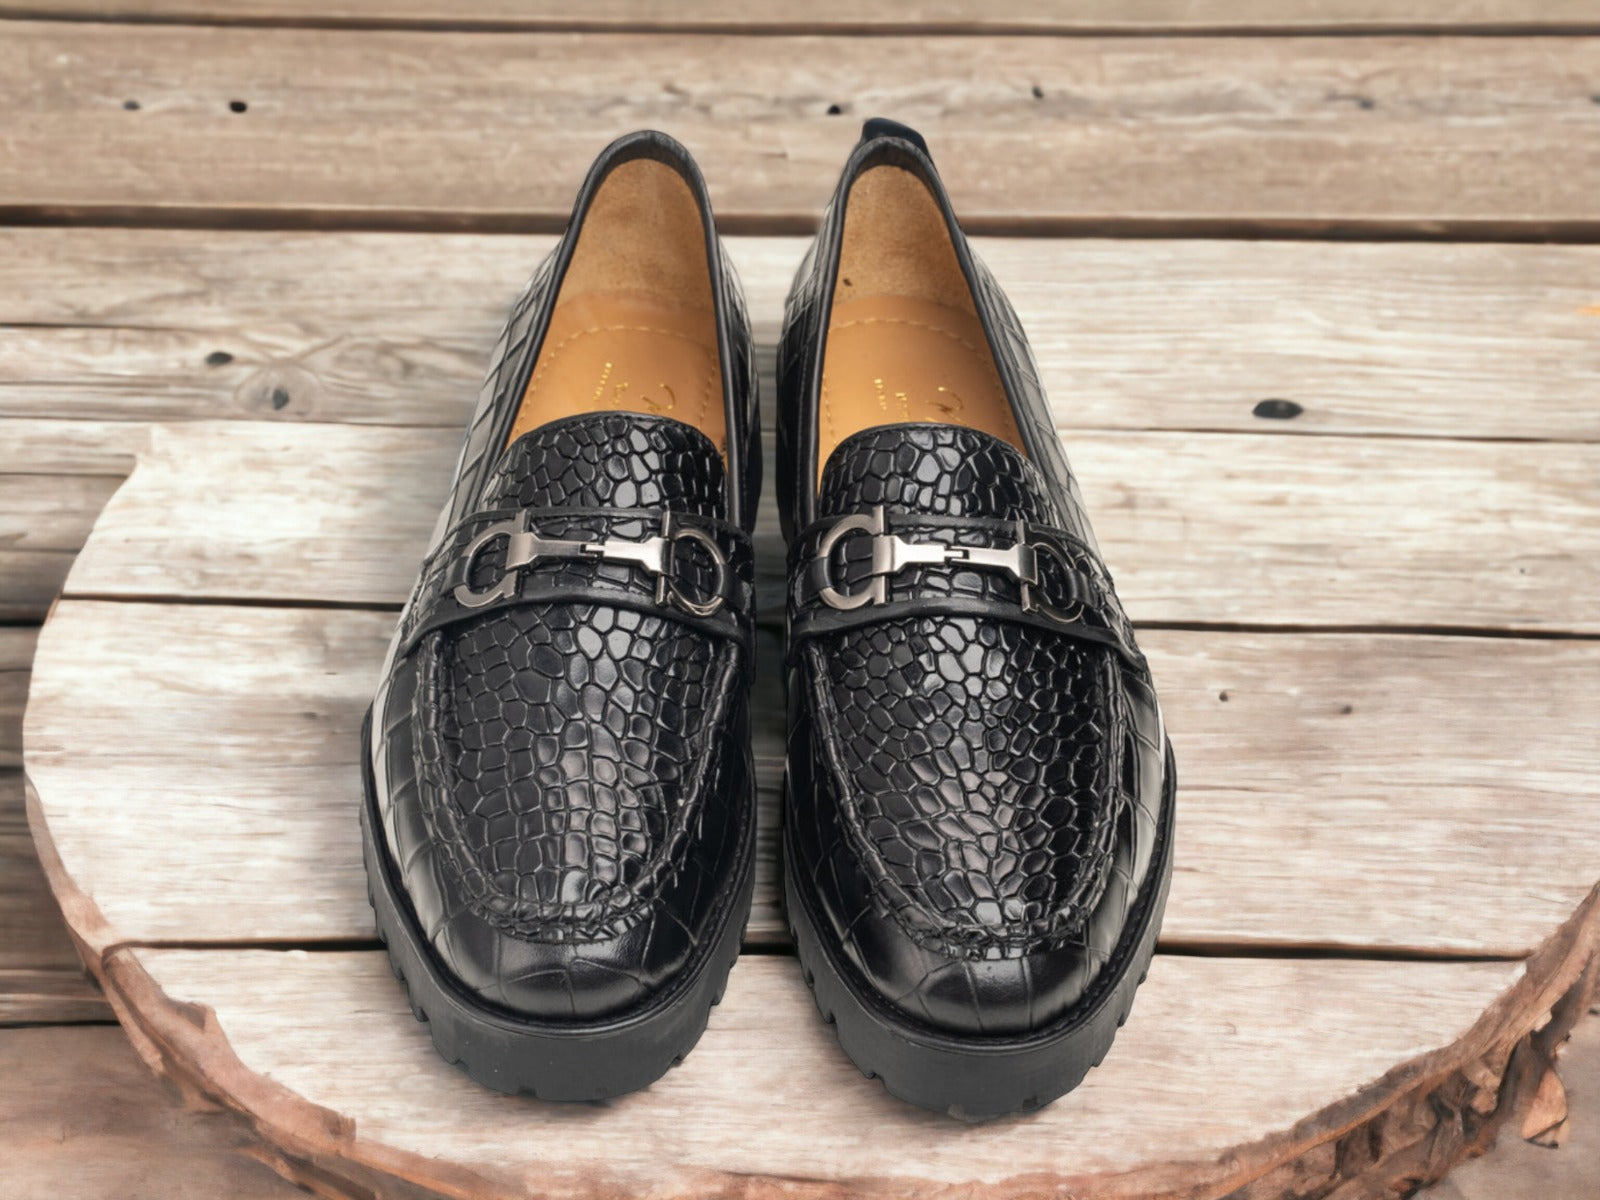 Awesome Gucci Loafer  Loafers men outfit, Gucci loafers outfit